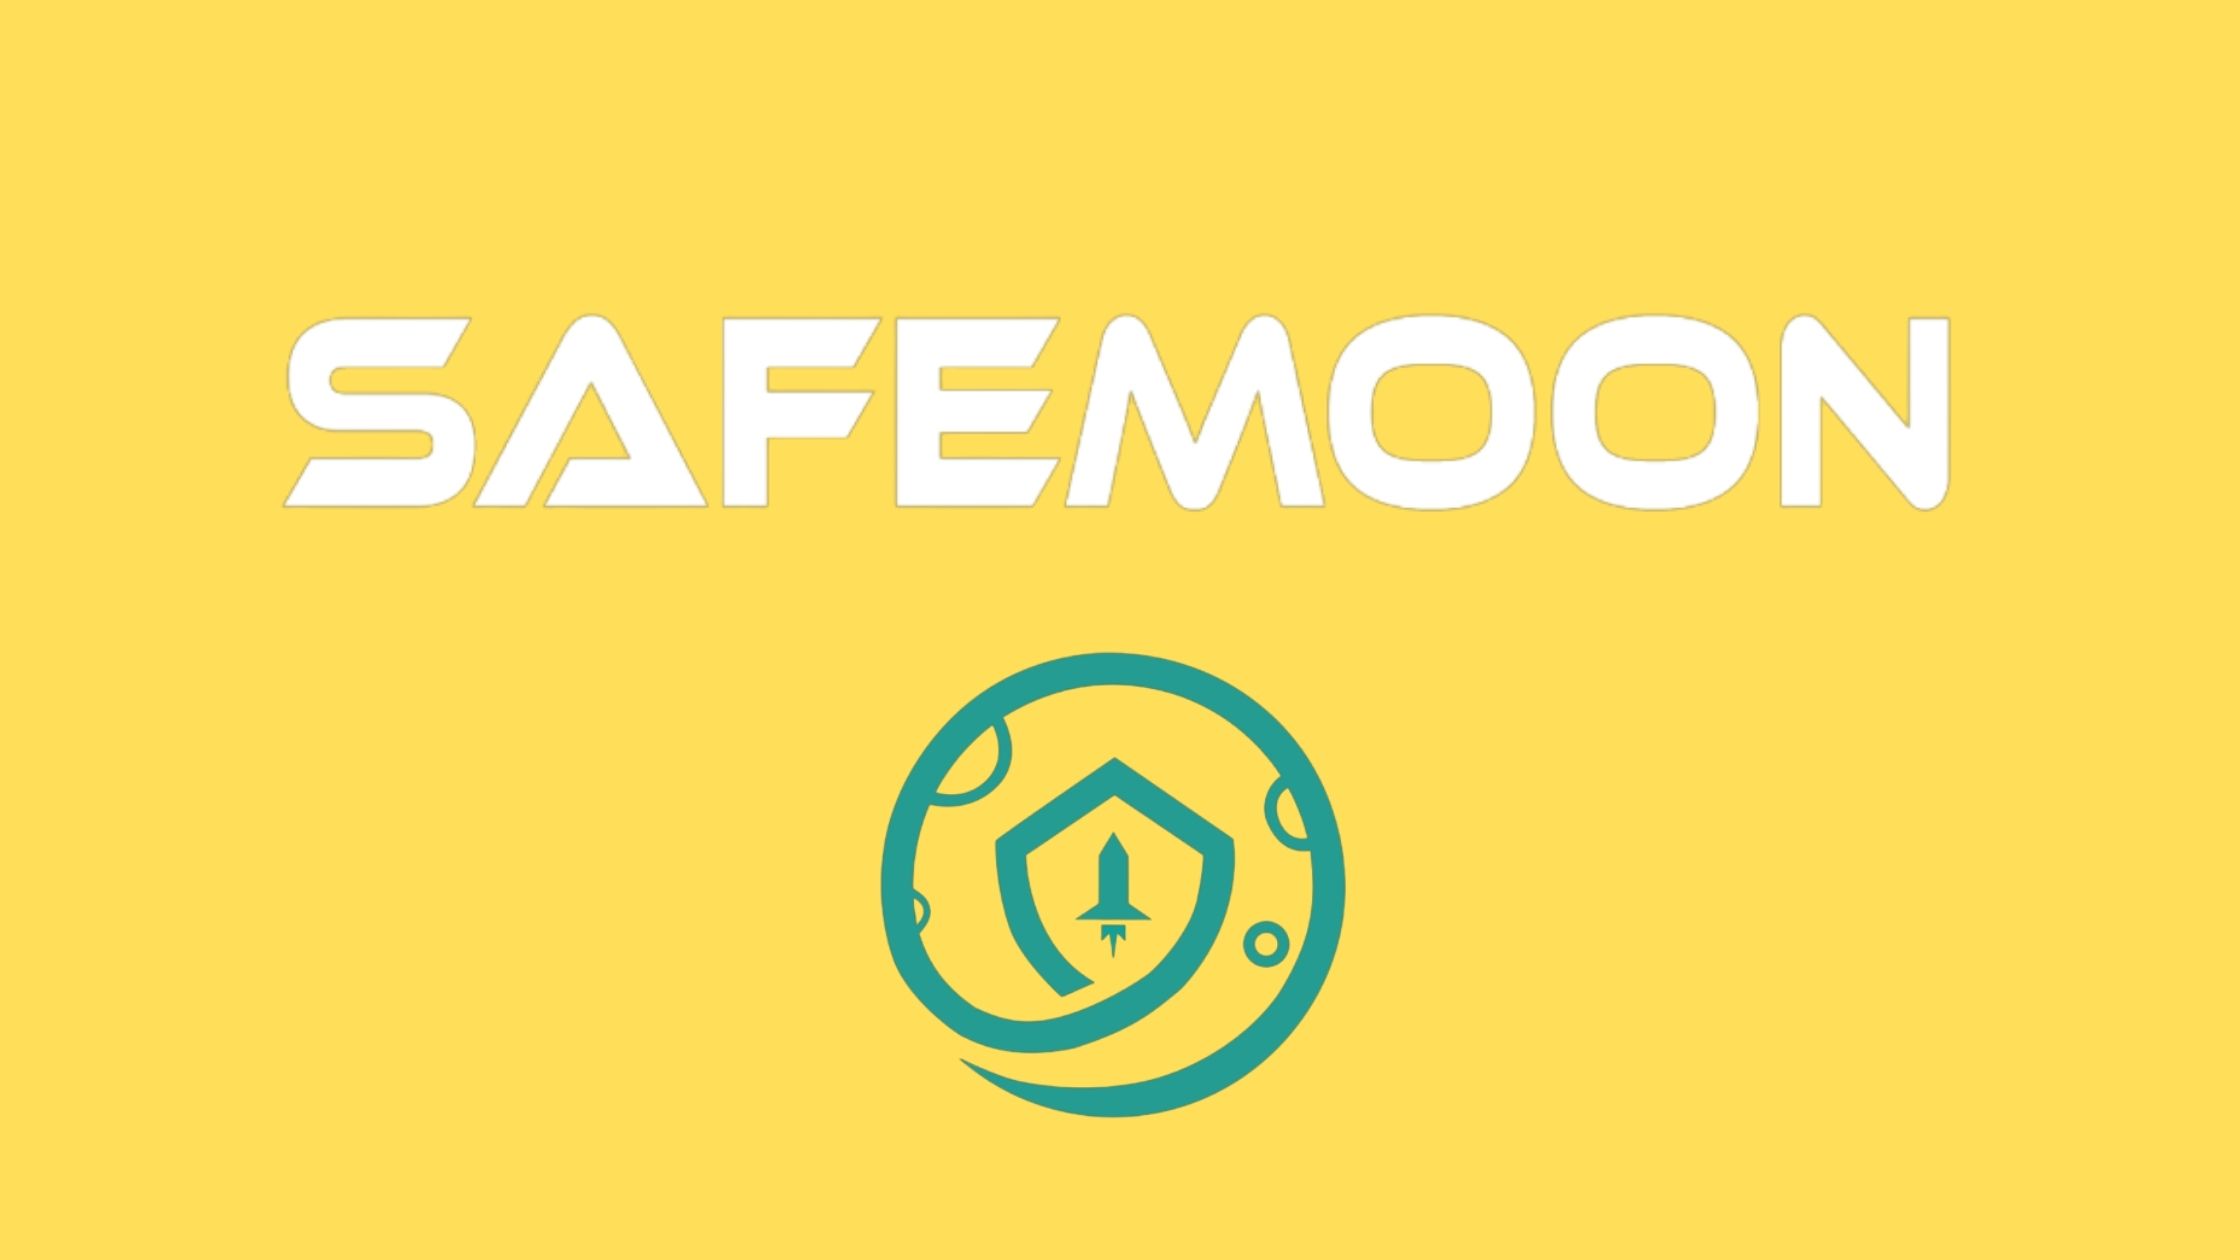 An Insight on the Difficulty to Buy SafeMoon, its Cheap ...